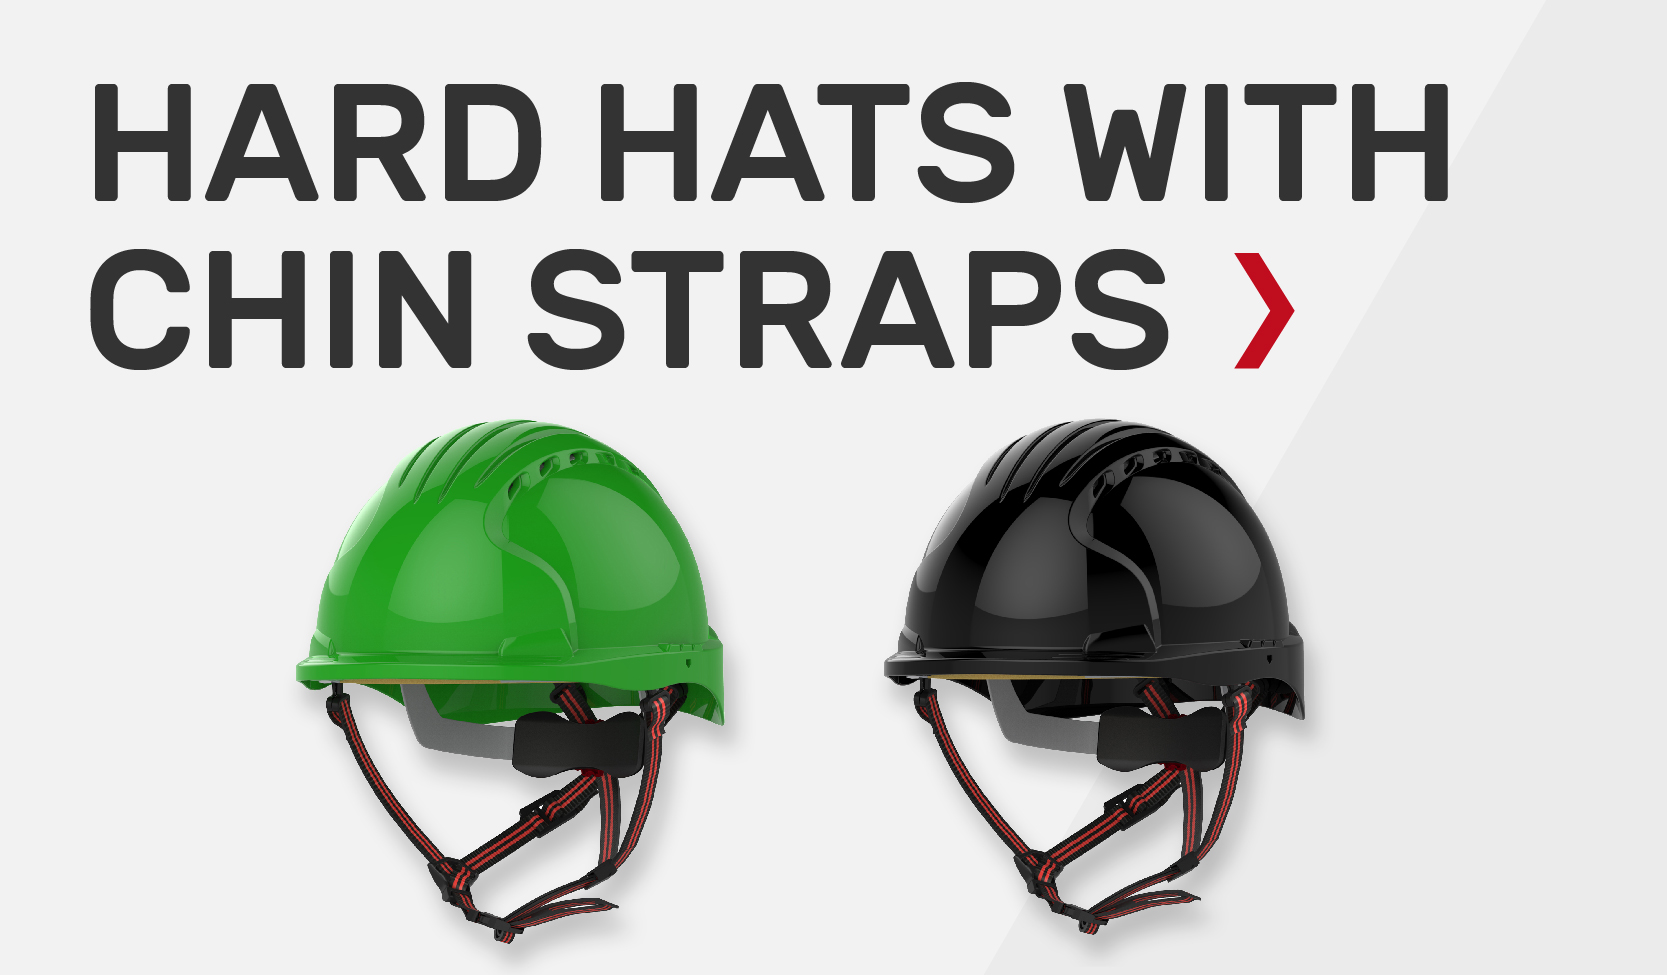 Browse All Hard Hats With Chin Straps